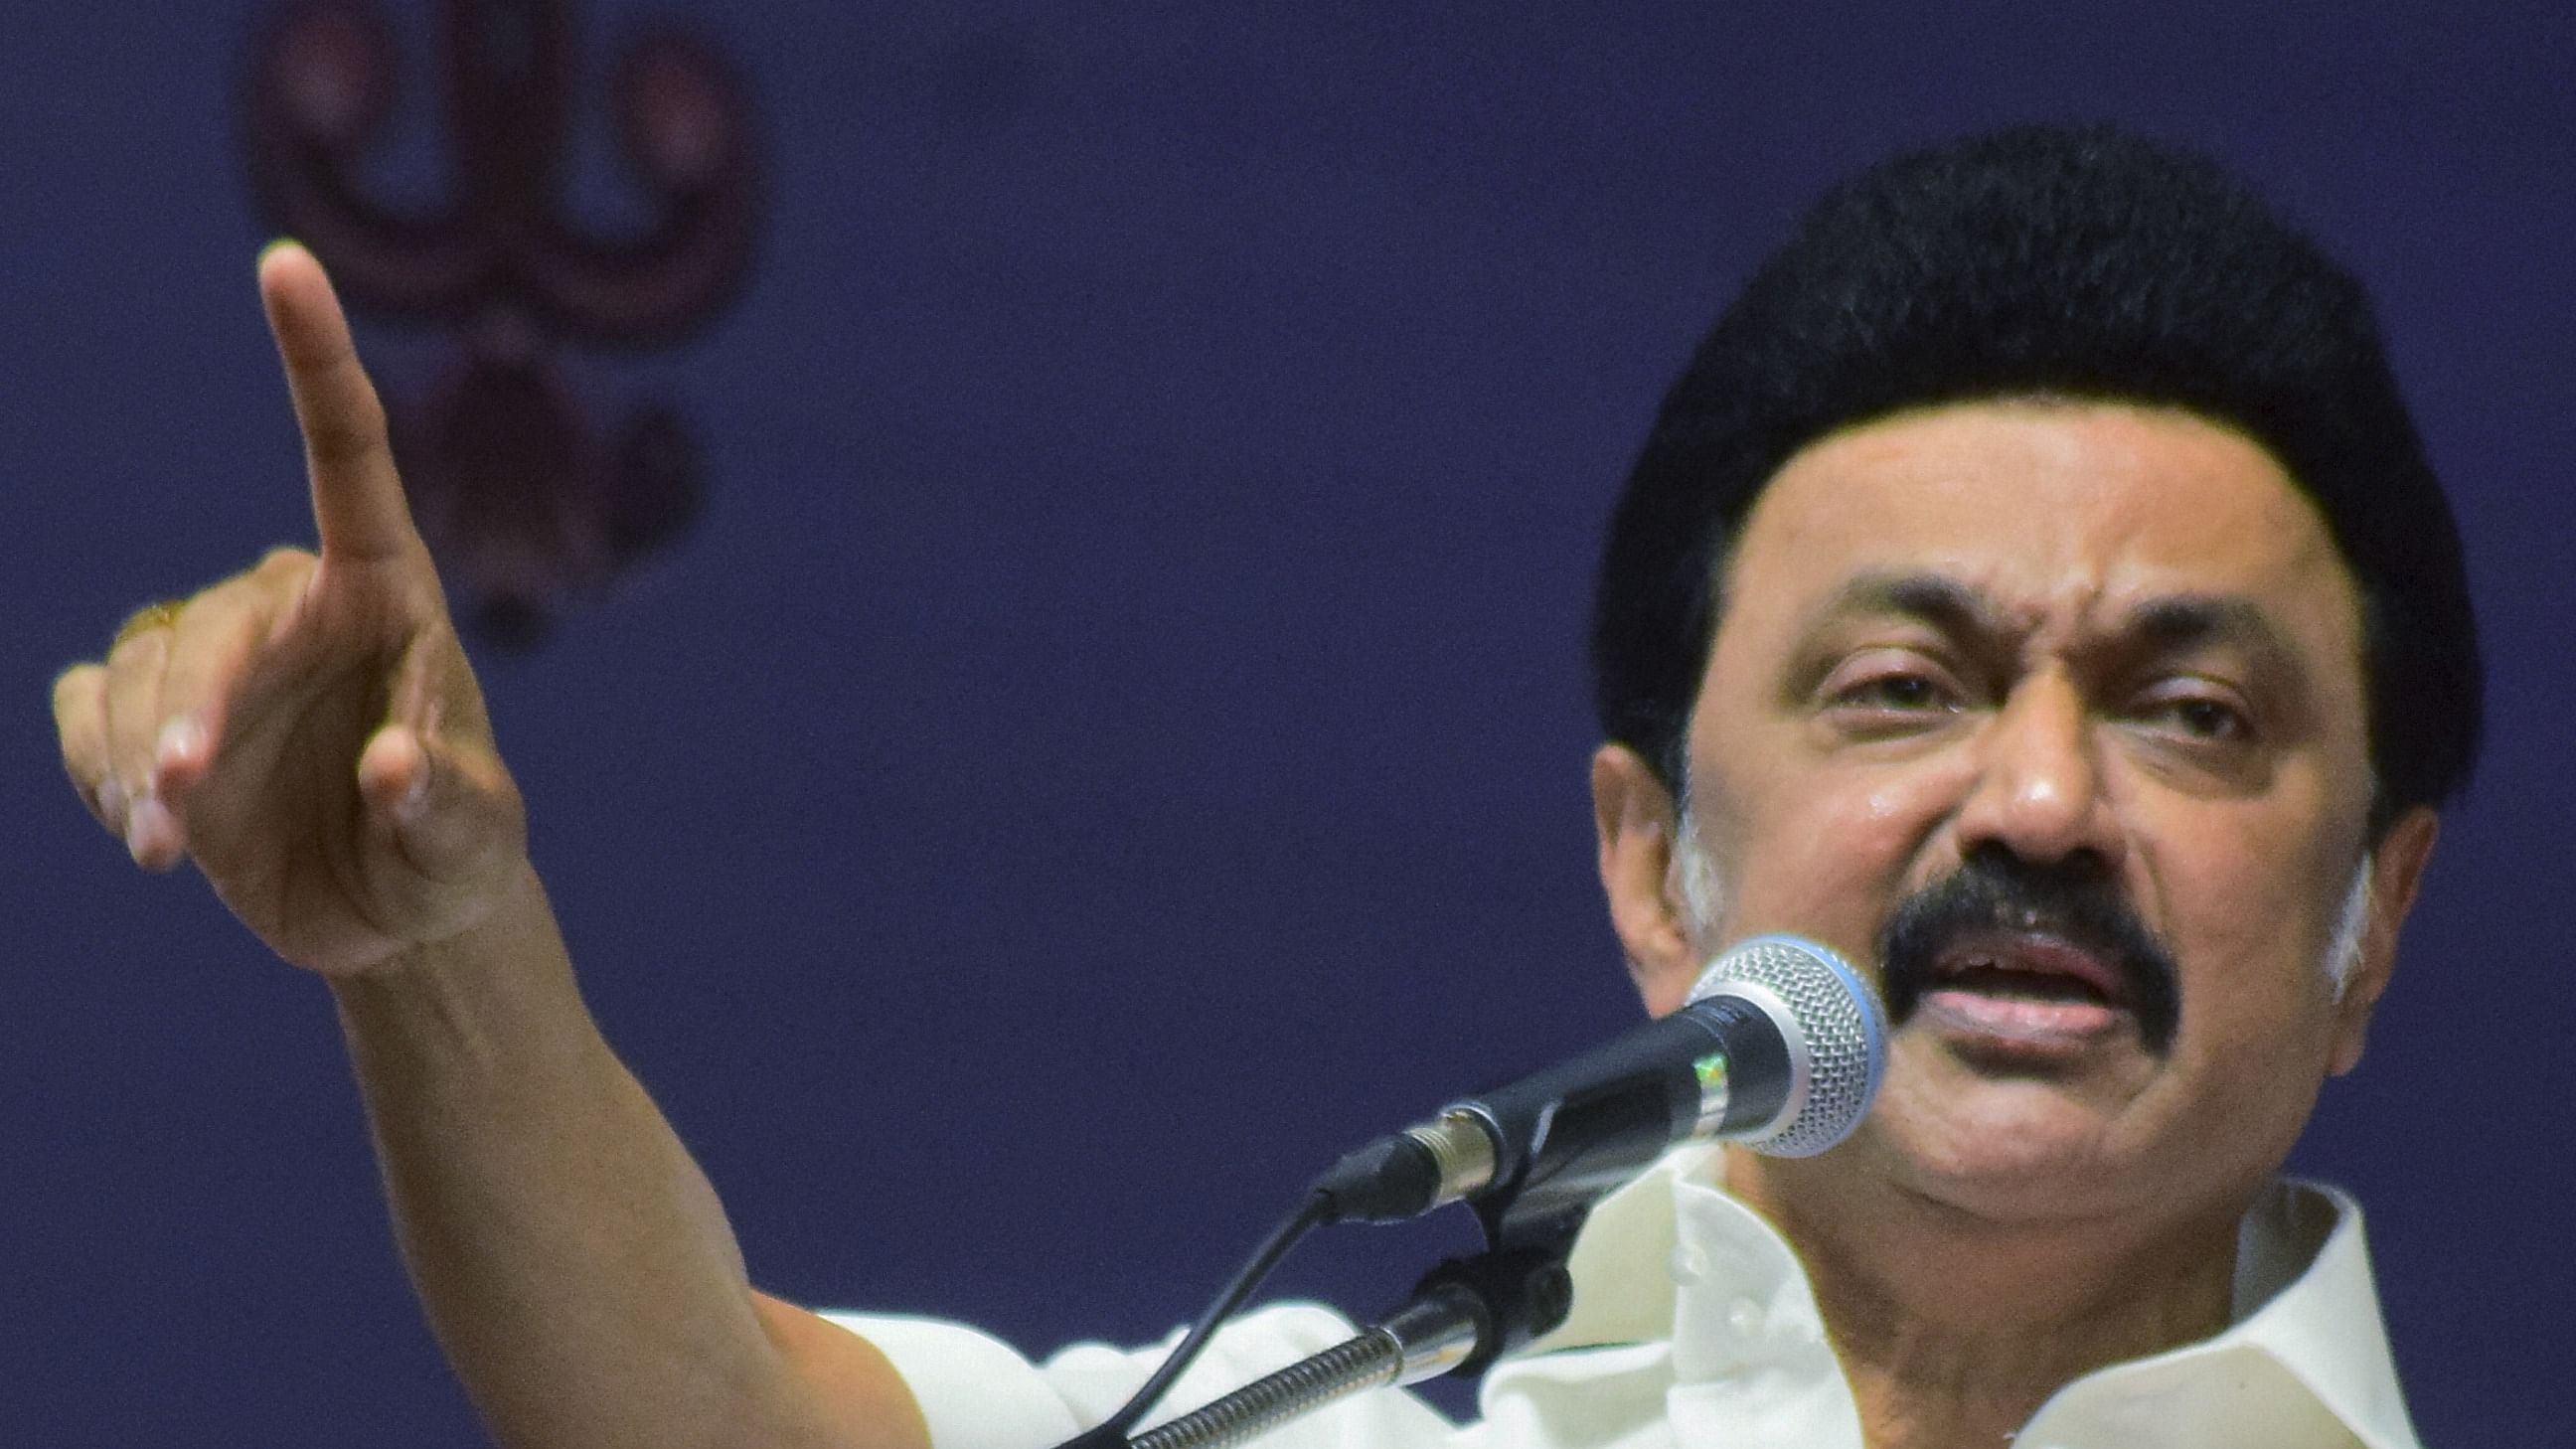 Listing out the initiatives in Health and Education, including those delivered on doorsteps, Tamil Nadu Chief Minister Stalin said "these are not freebies (but) social welfare schemes". Credit: DH File Photo